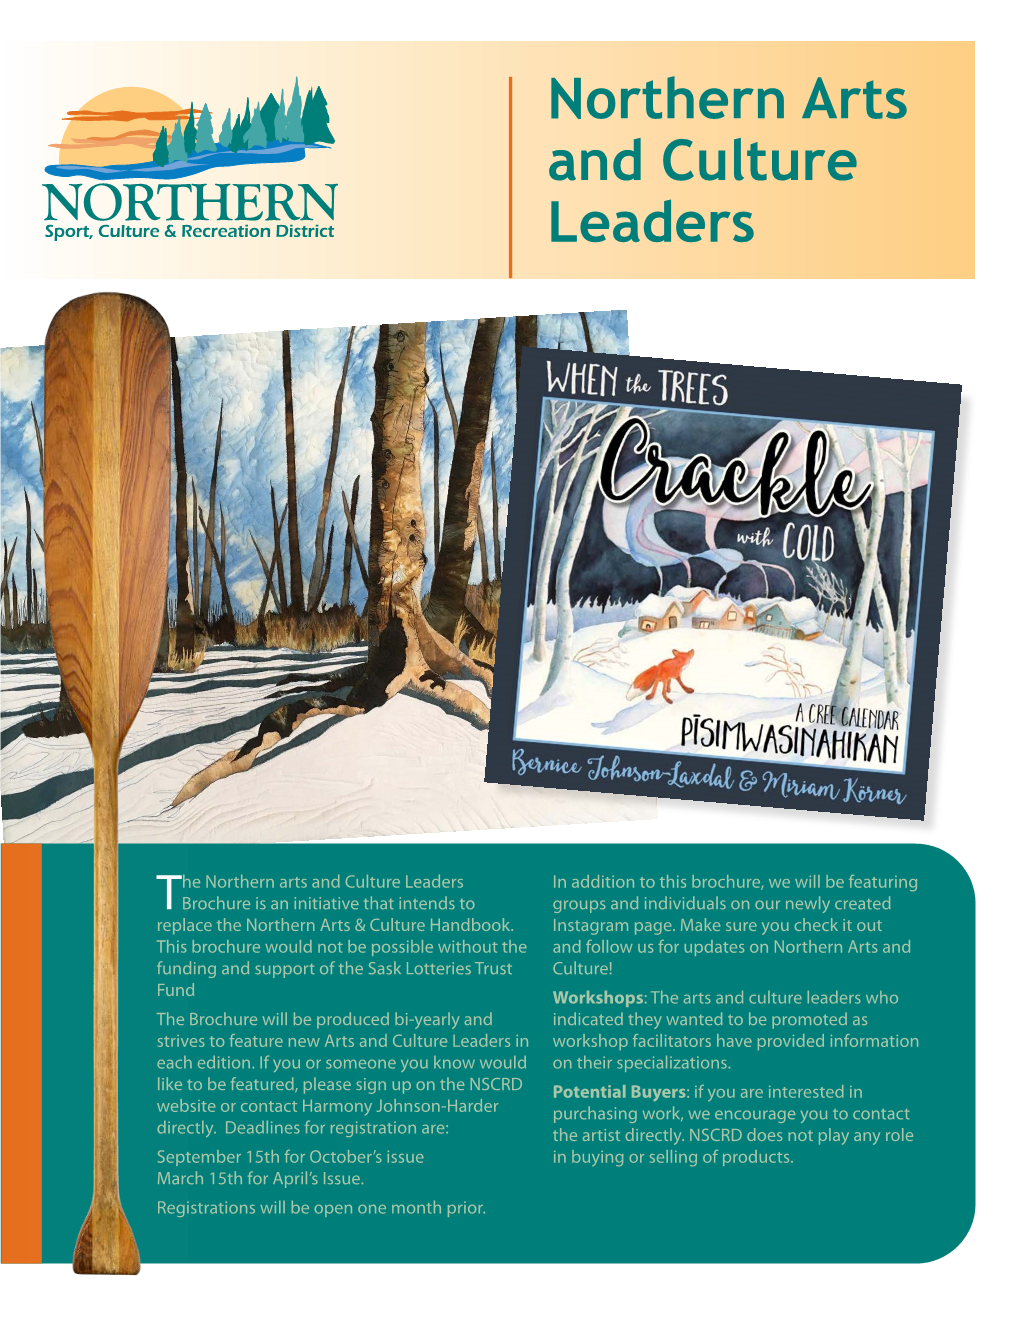 Northern Arts and Culture Leaders